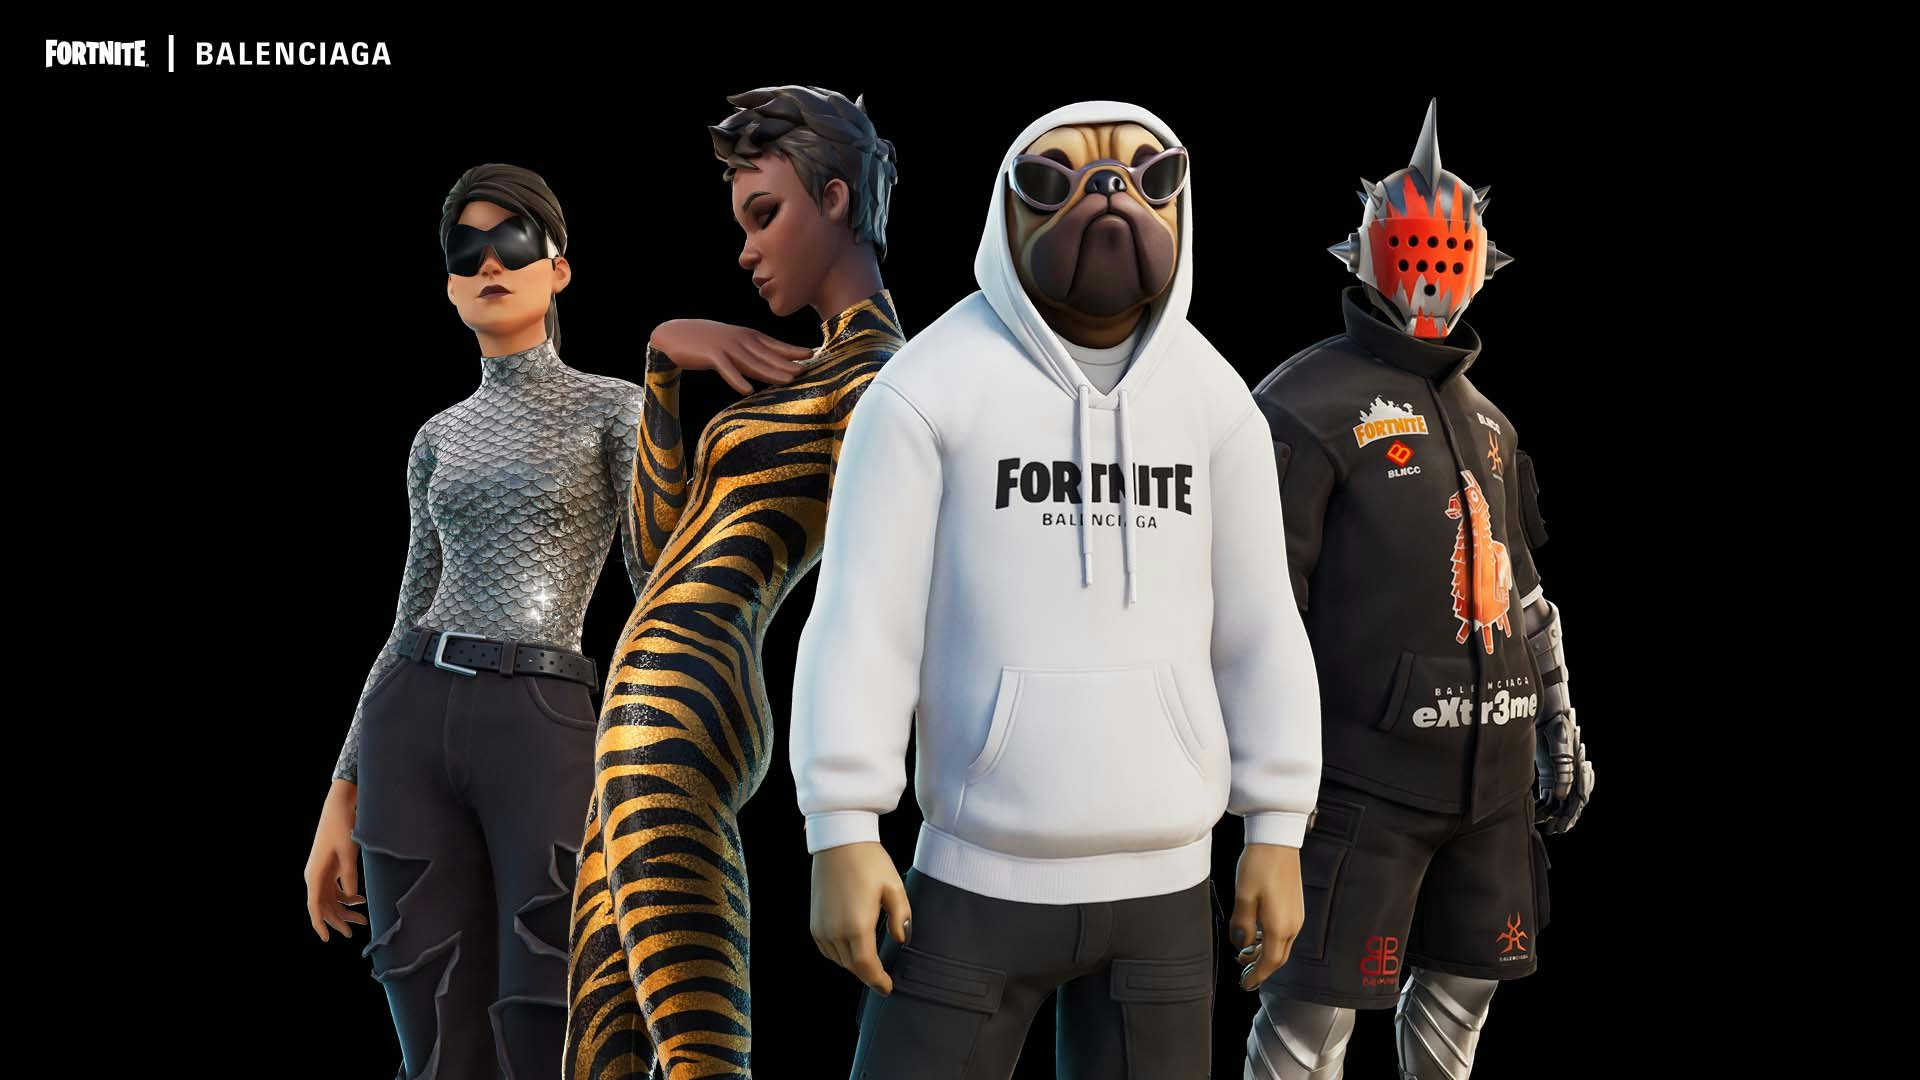 Fortnite' x Balenciaga apparel is coming to the game and the real 